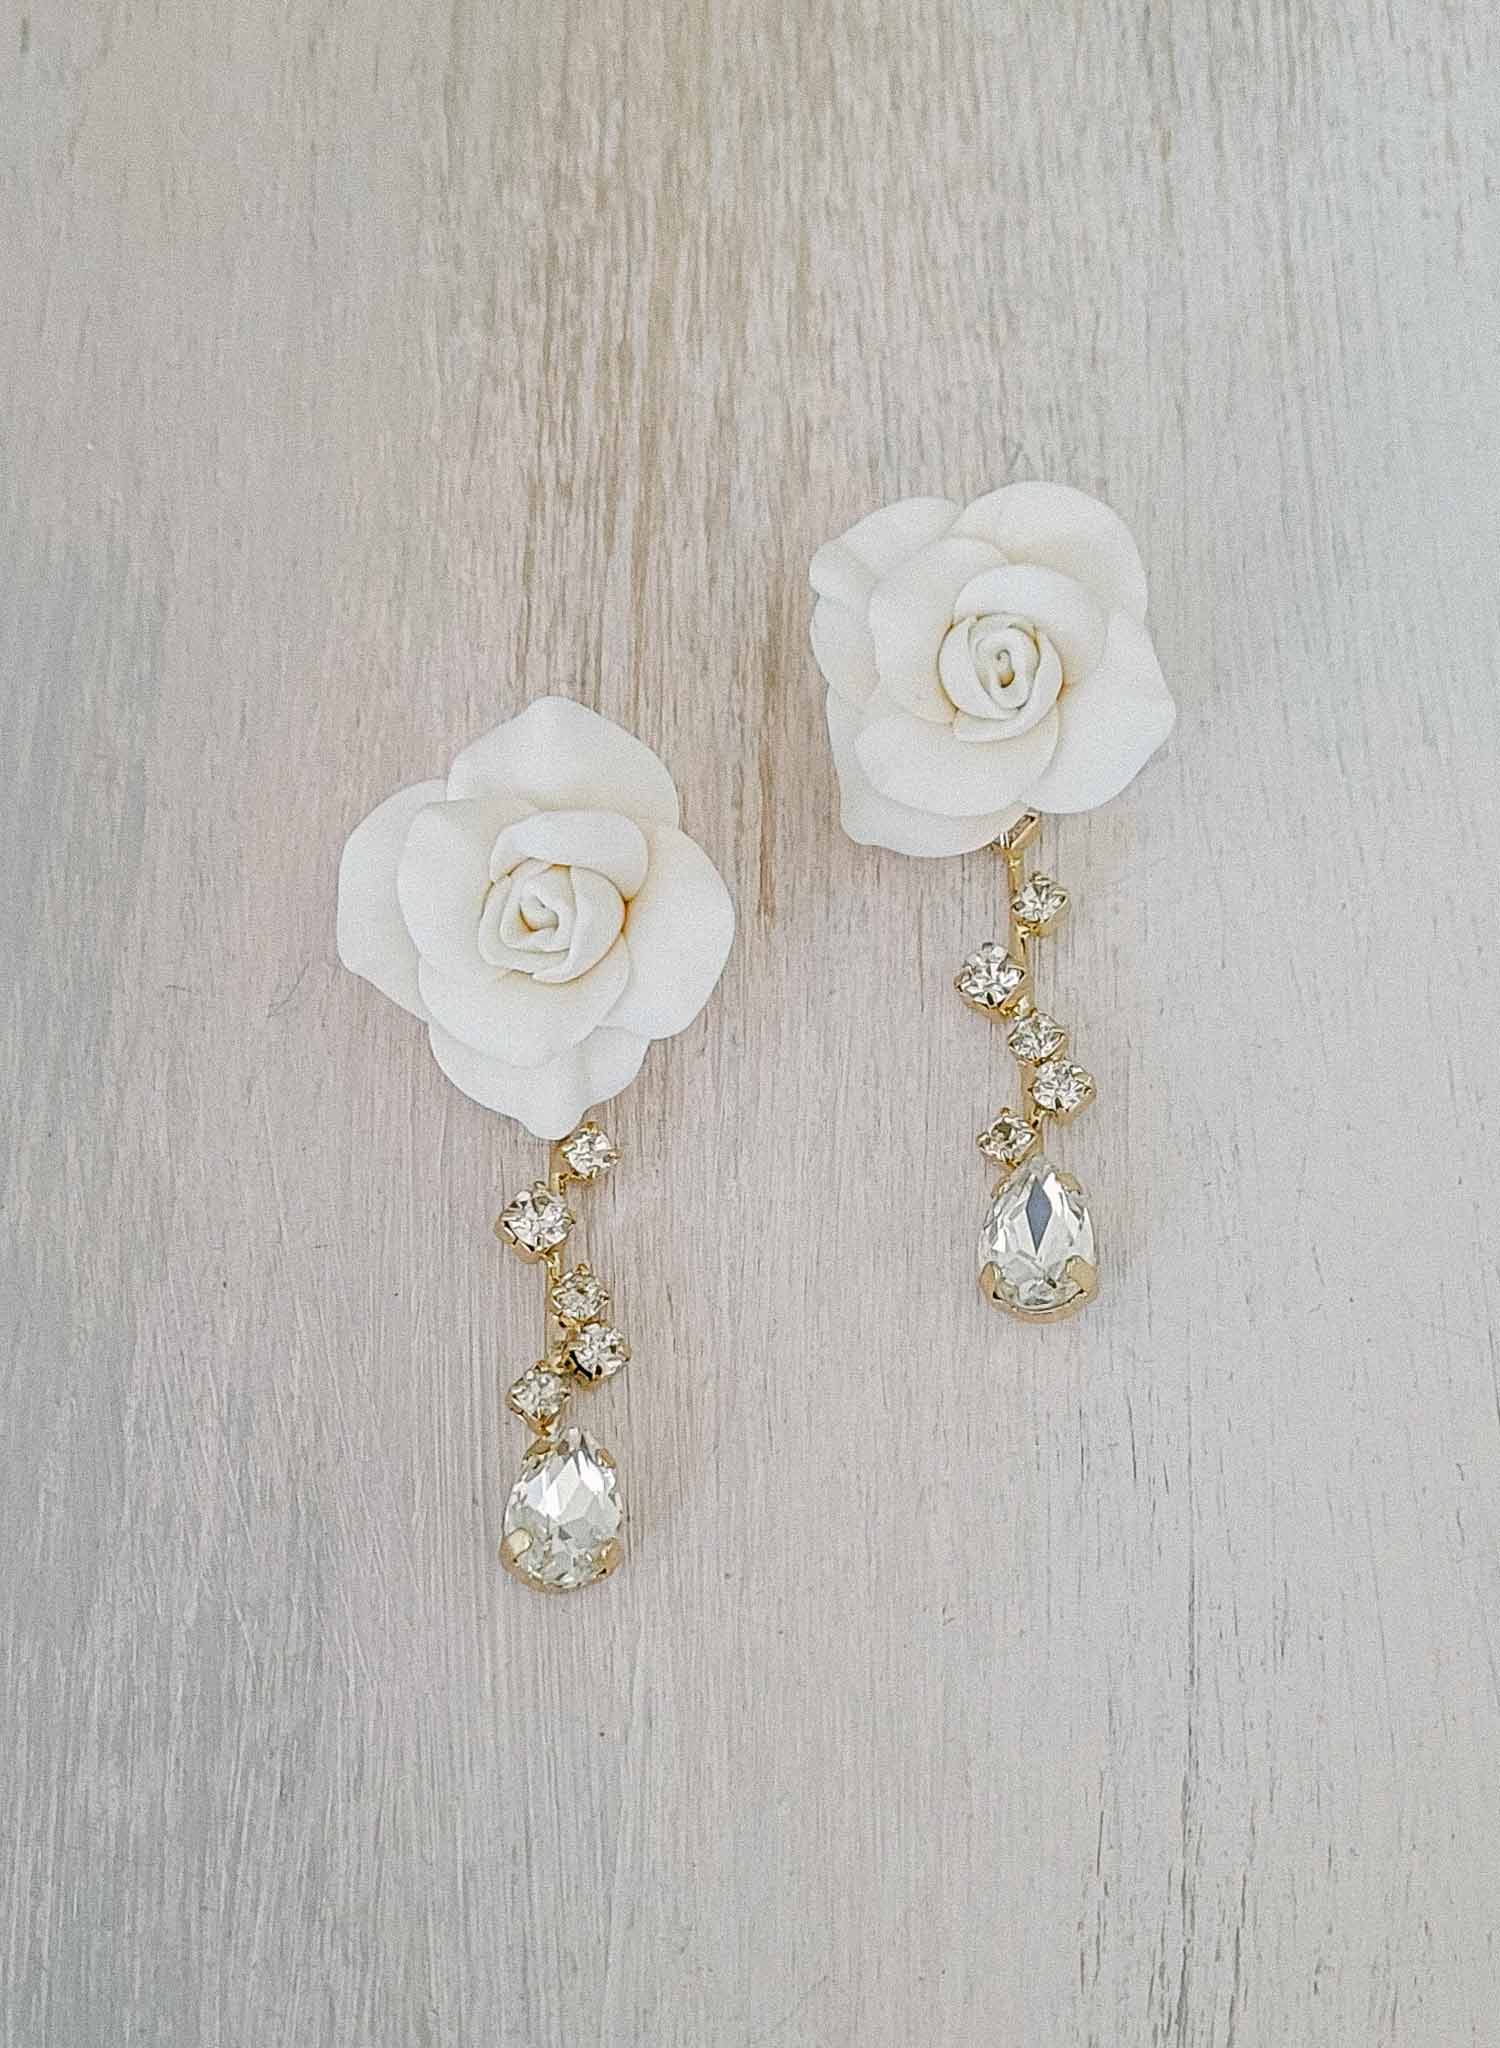 Rose bloom and crystal tendril earrings - Style #2374